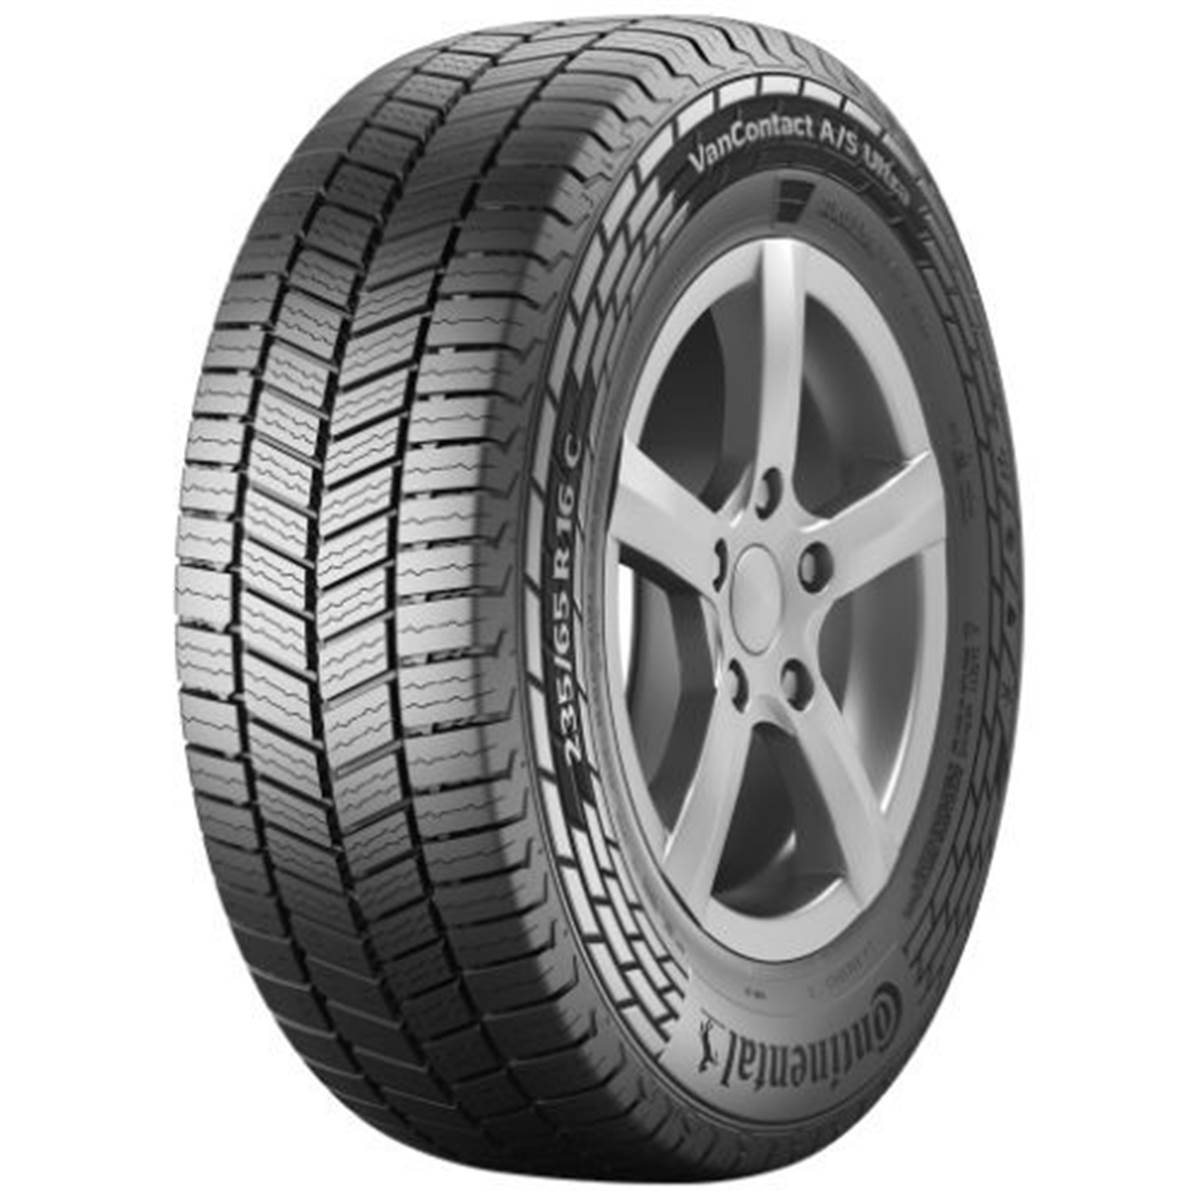 Continental Neumático  Vancontact A/S Ultra 215/70R15 109S